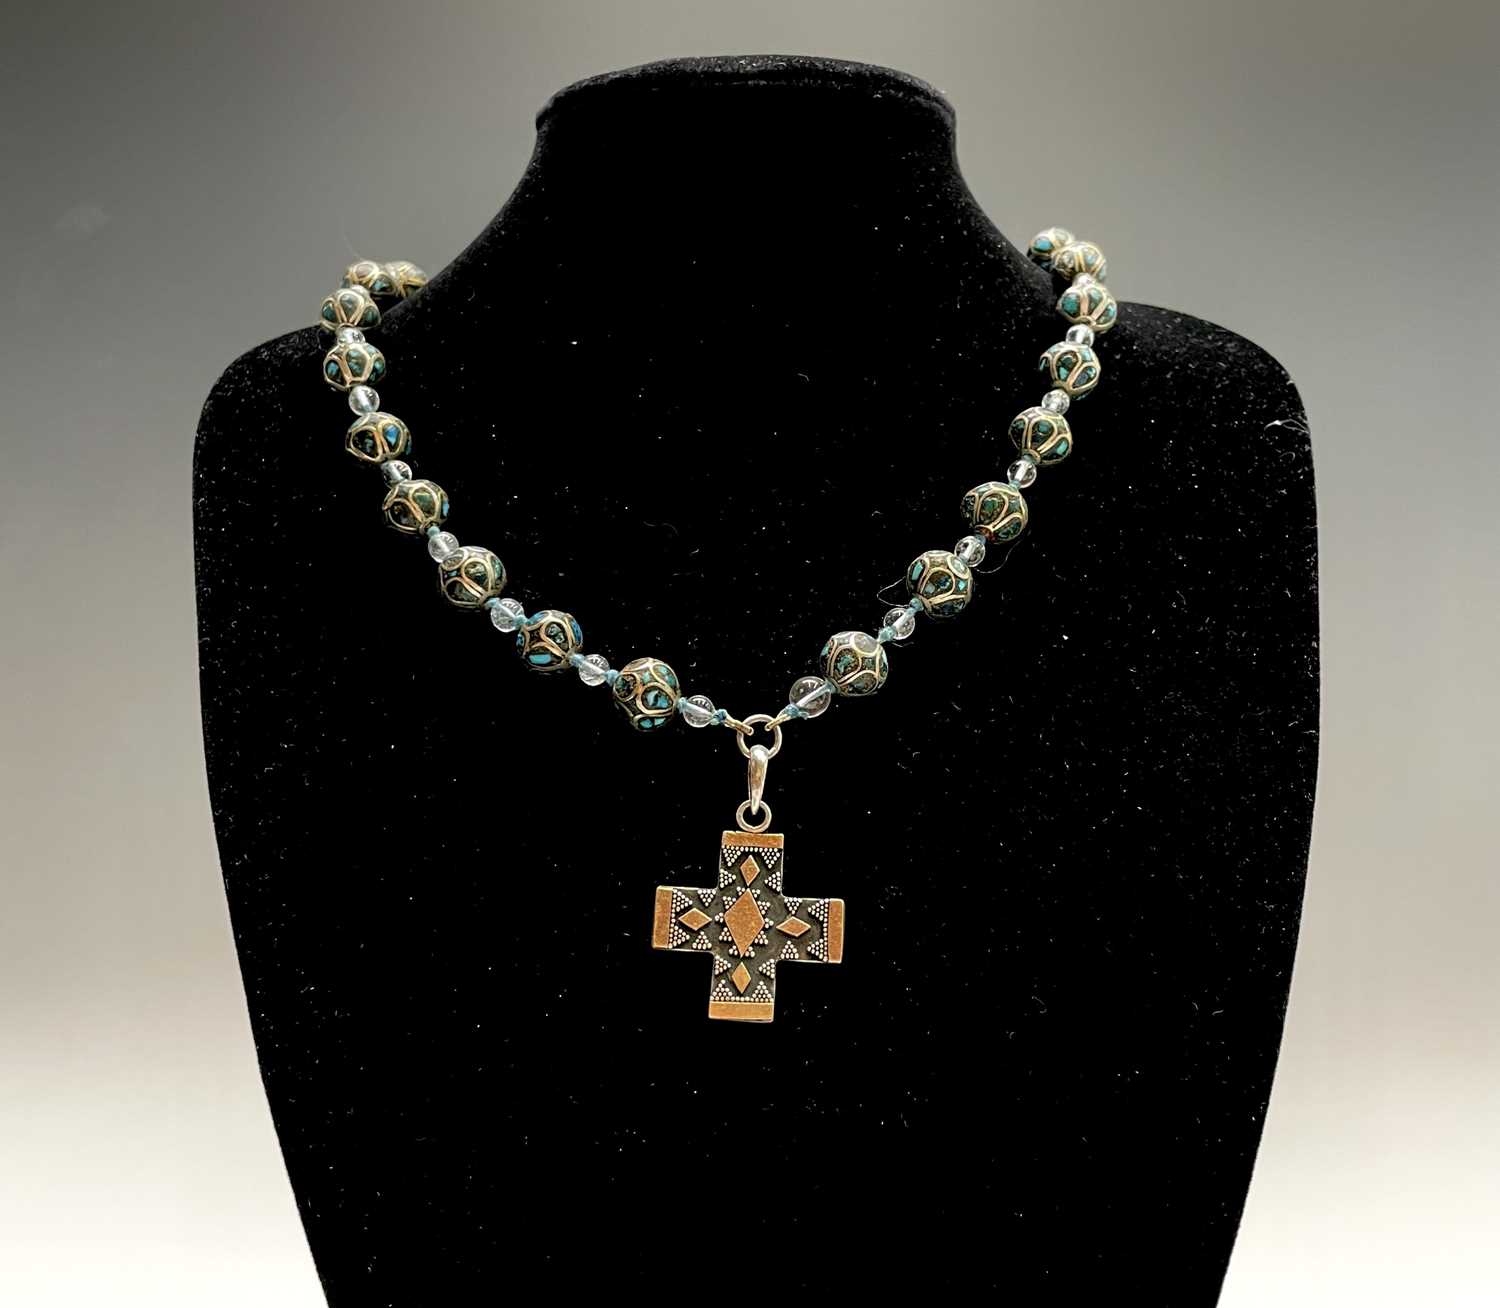 Fifteen rosary bead necklaces, all with unique decorative crosses. - Image 19 of 20